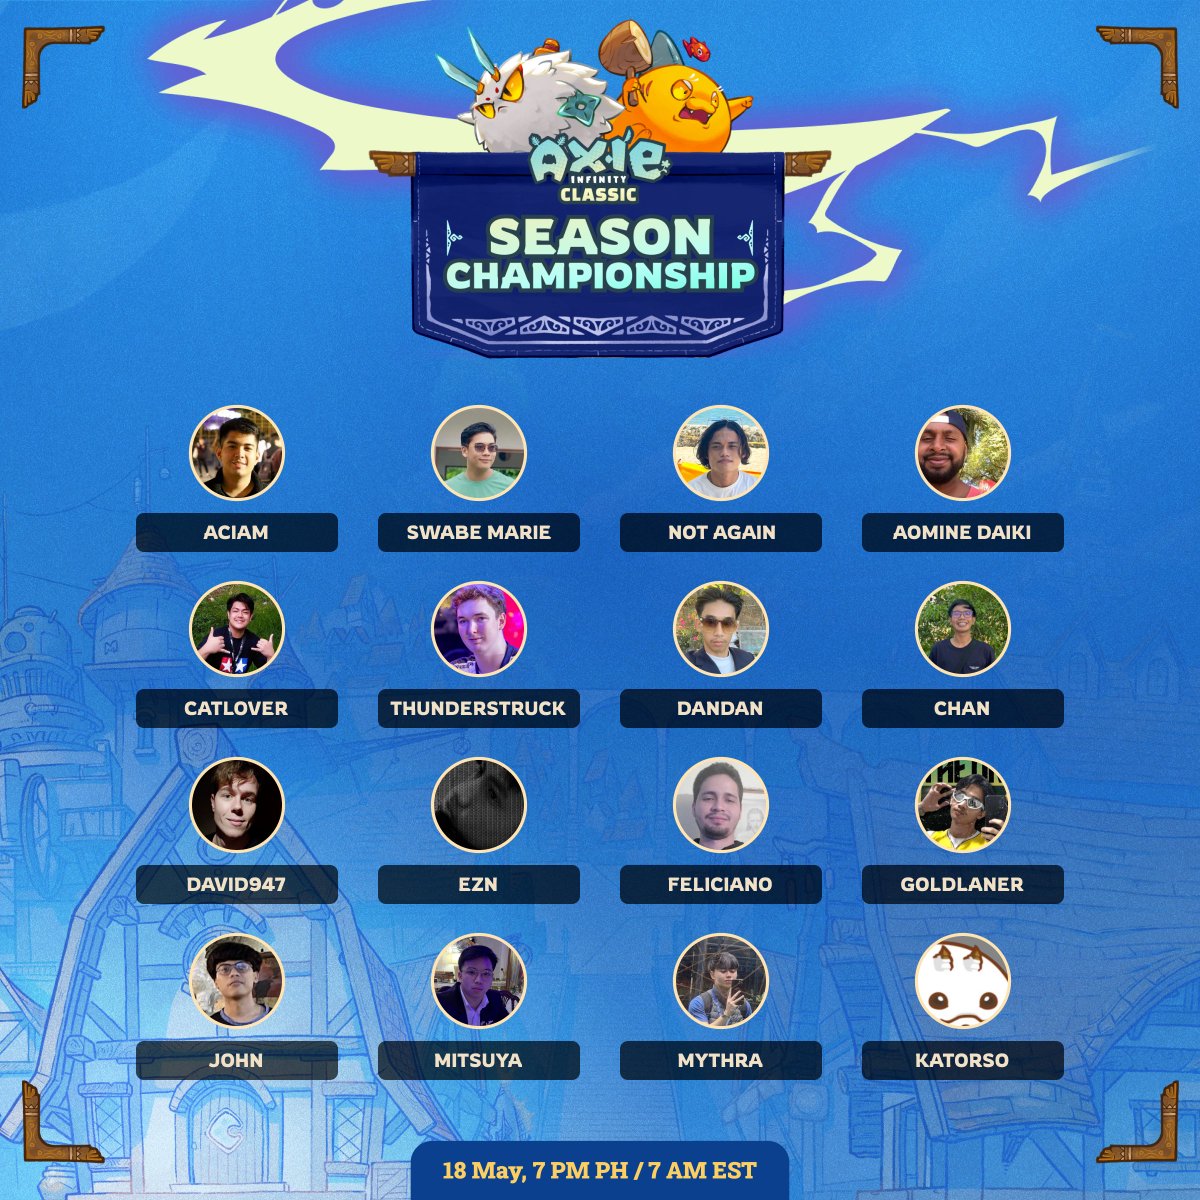 Axie Classic Season Championship Sixteen players have qualified for the season championship after a challenging qualification process through the Grand Tournament and Arena Leaderboard. ⚔️ The final battle is upon us, with 2000 AXS at stake, and the champion will qualify